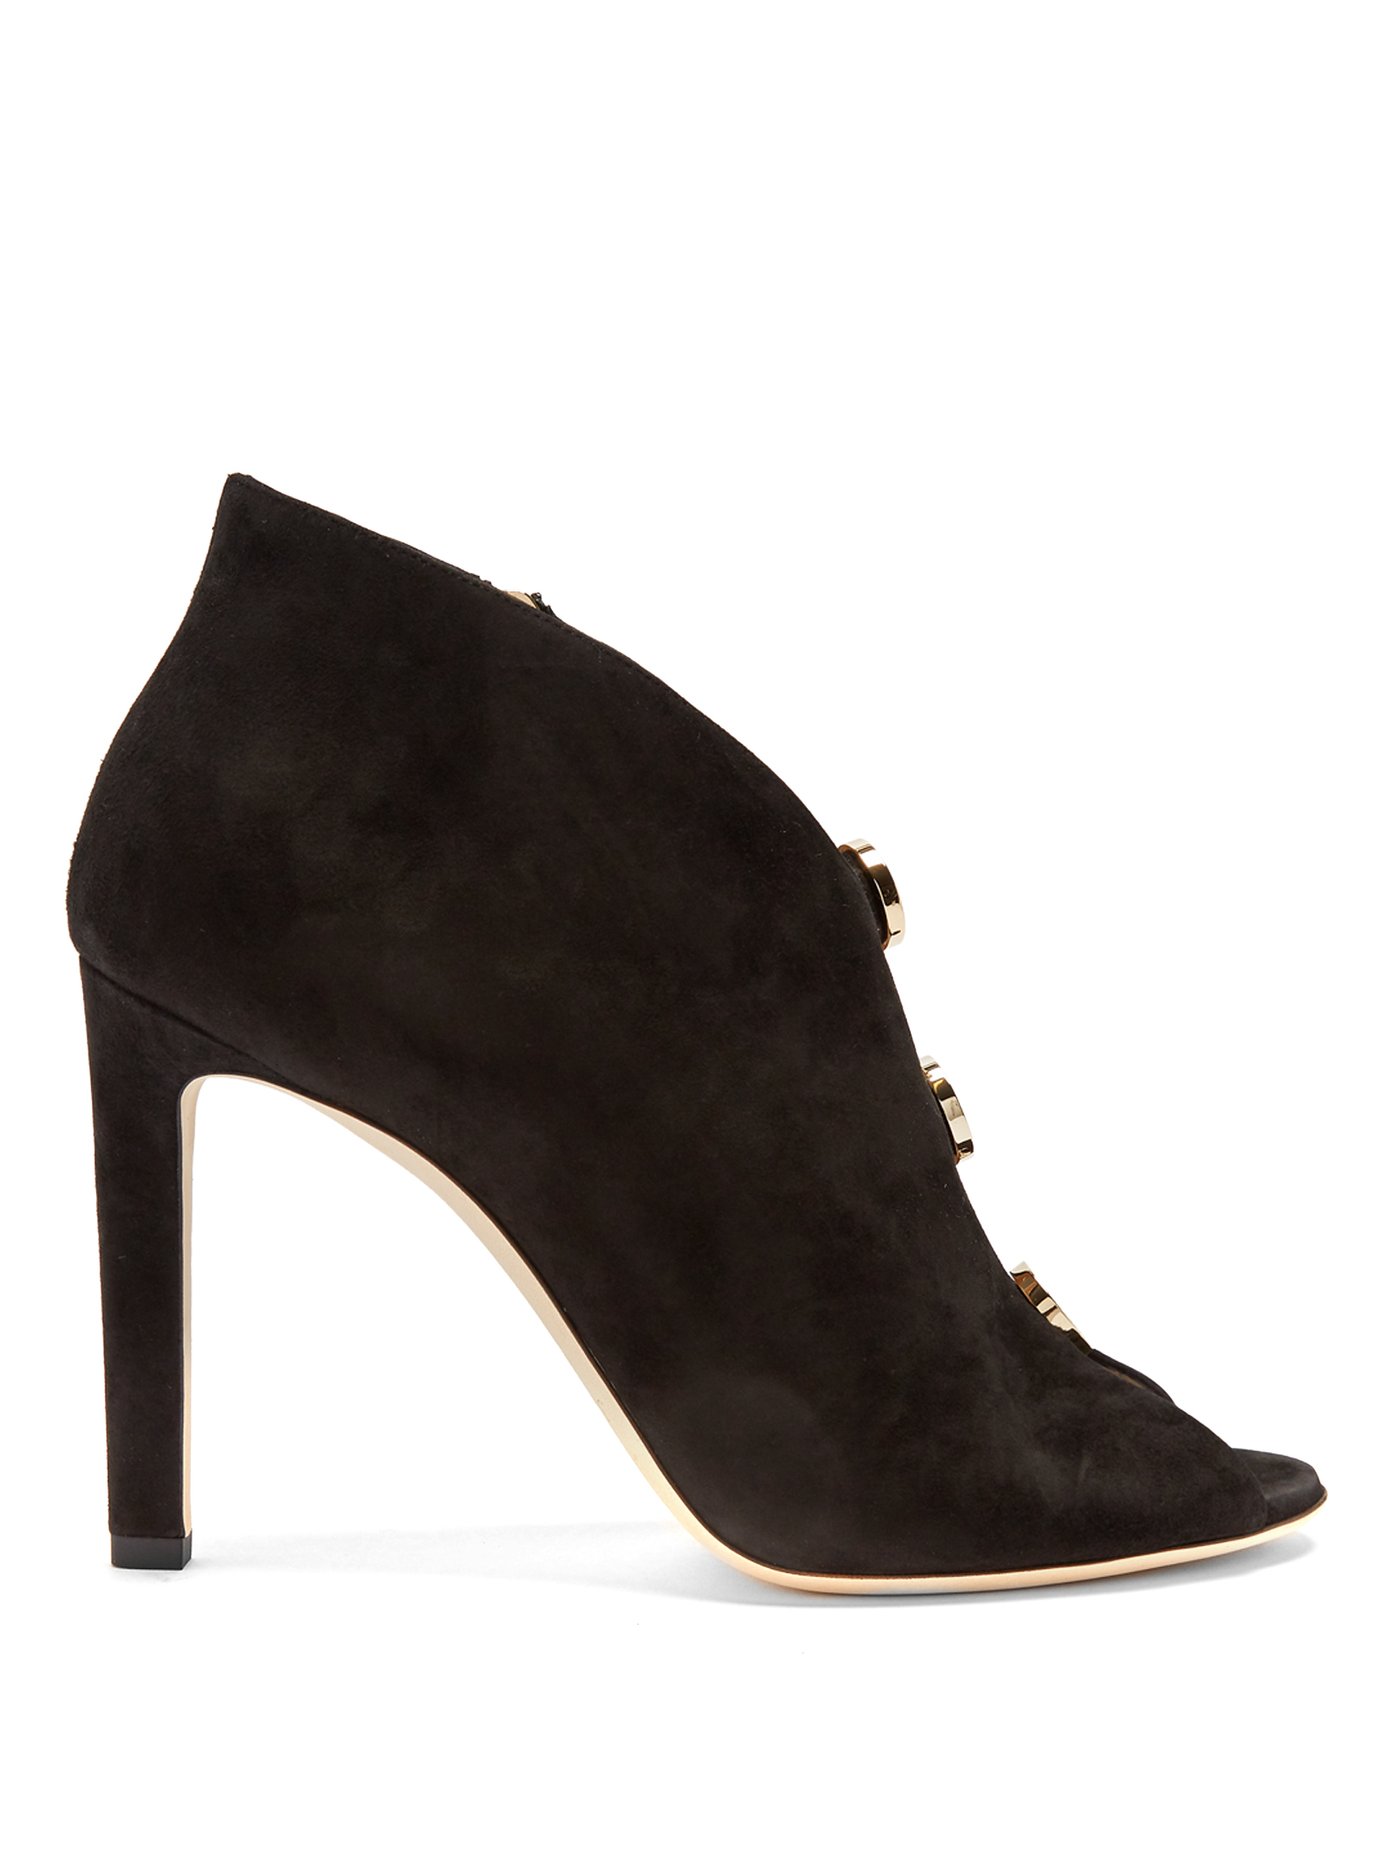 Lorna 100mm suede ankle boots | Jimmy 